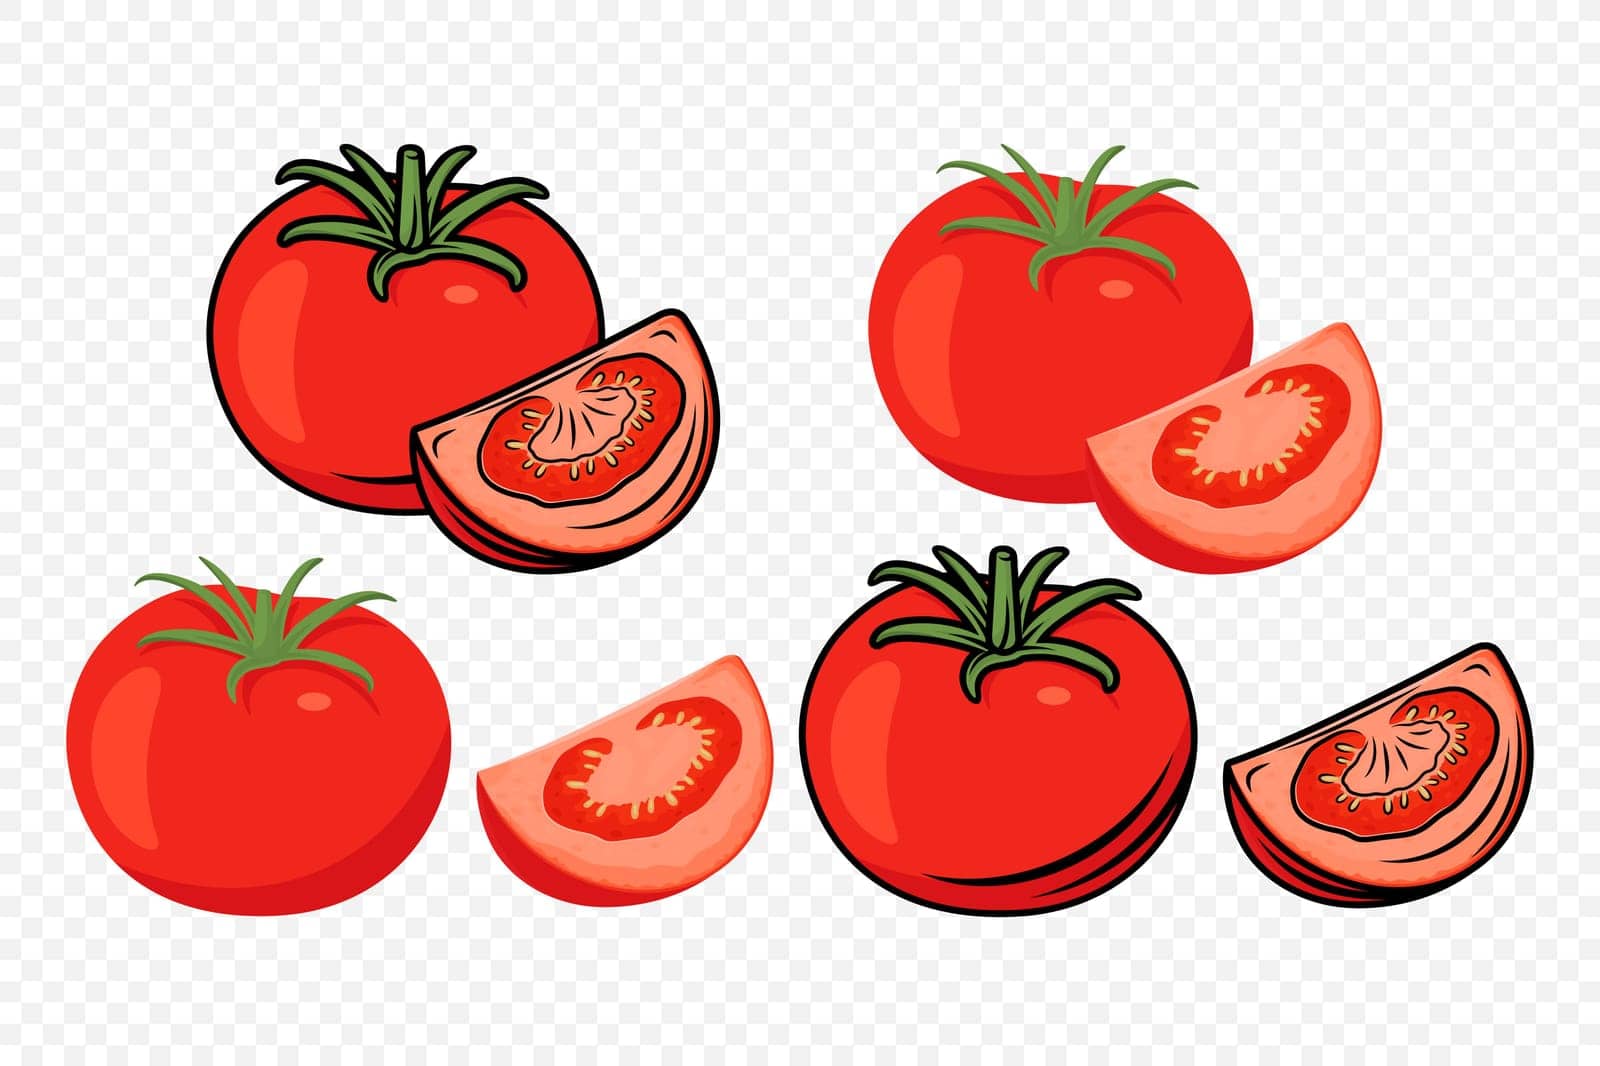 Flat Vector Fresh Tomato Icon Set Isolated. Whole and Quartered Tomatoes Design Templates for Recipes, Menus, Culinary. Organic Tomato Clipart, Logo, Front View.